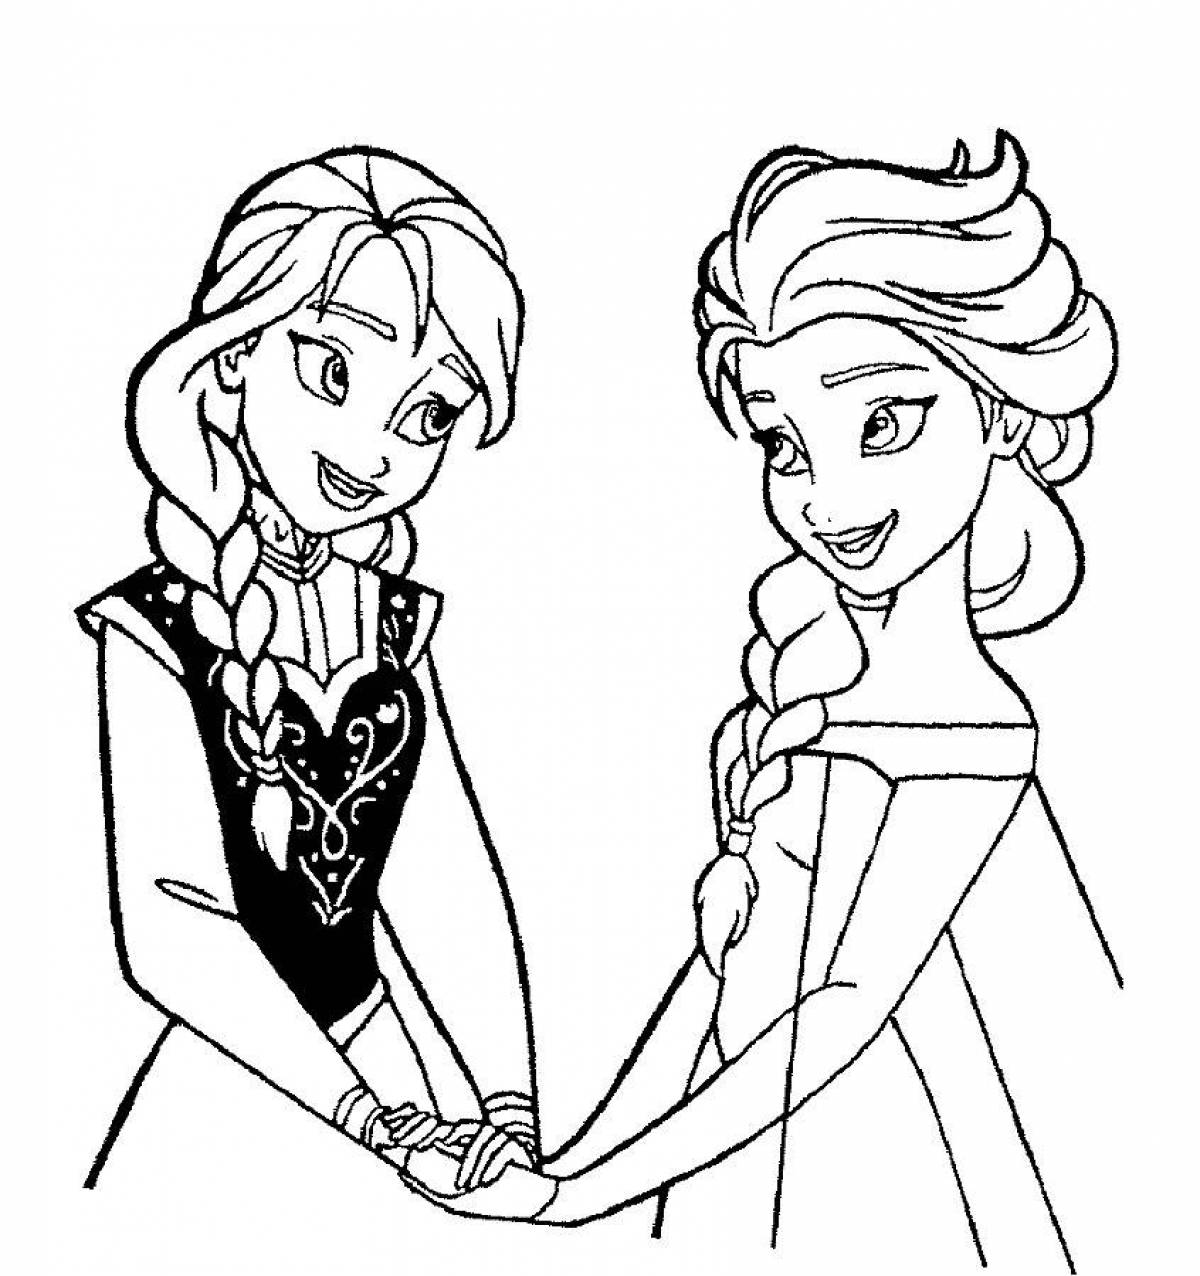 Elsa and anna for kids #5